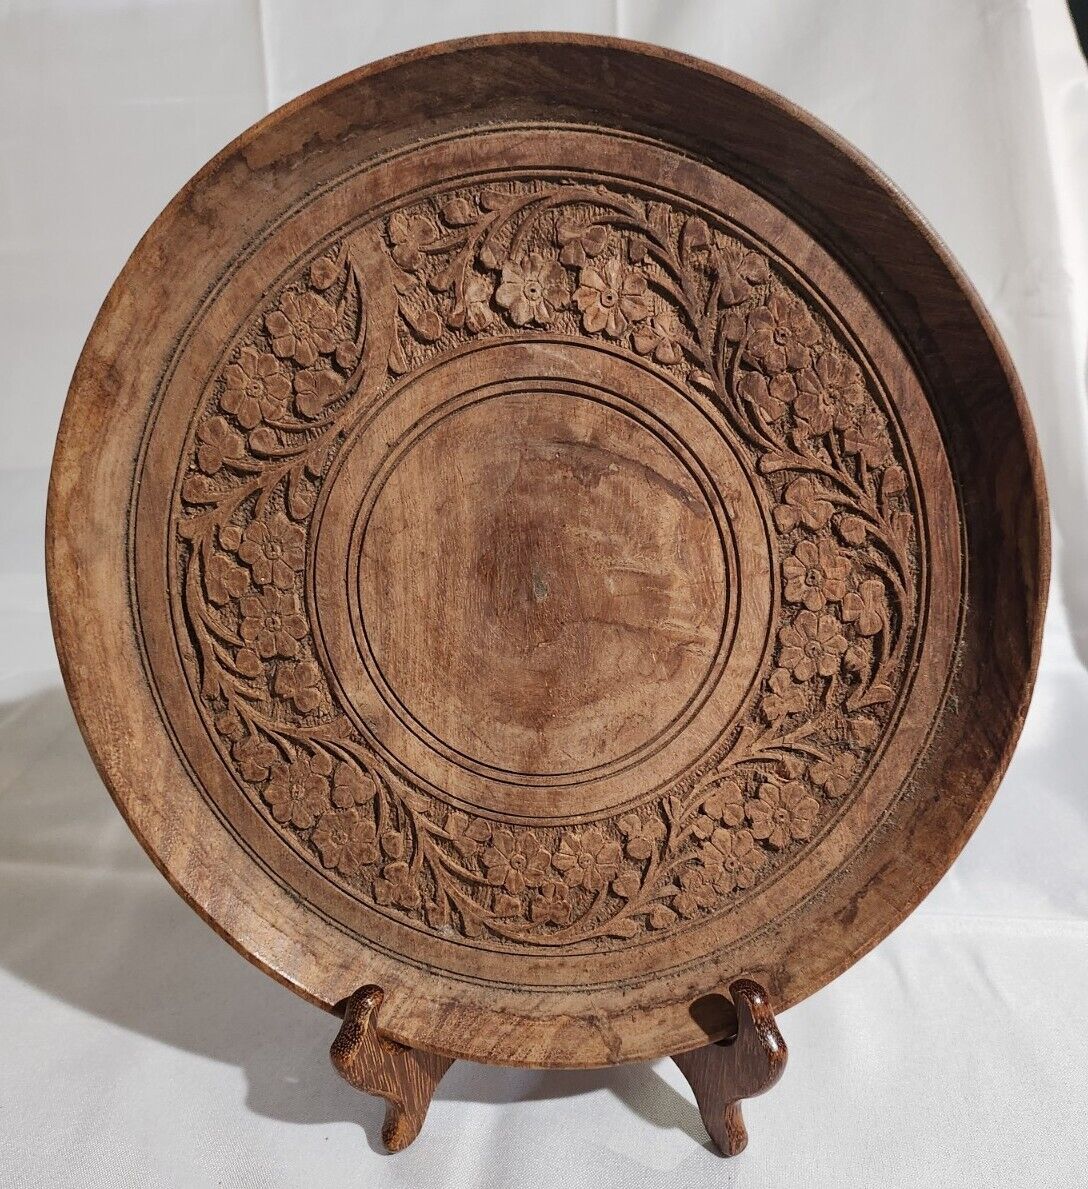 Archana HandiCrafts Carved Large Wood Plate Tray Decor India 12